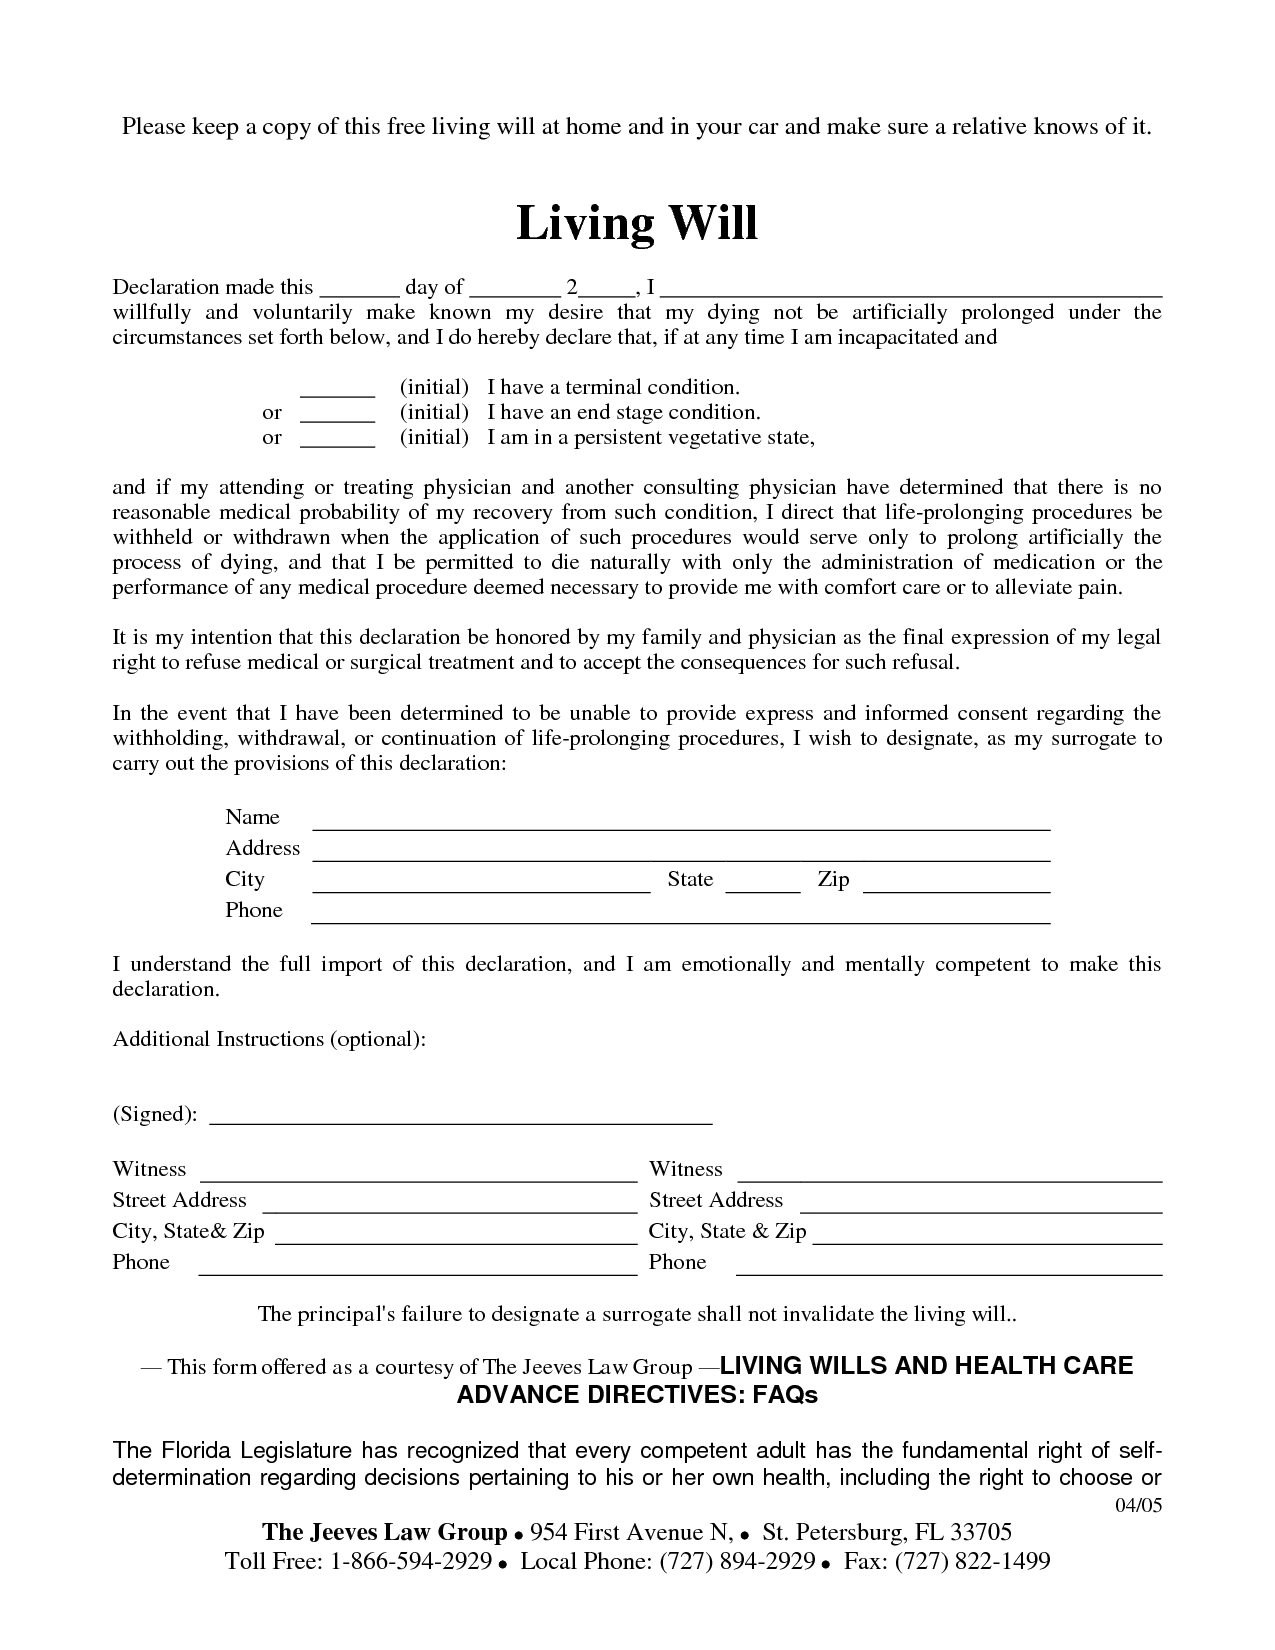 Free Living Will Forms Advance Directive Medical Poa 